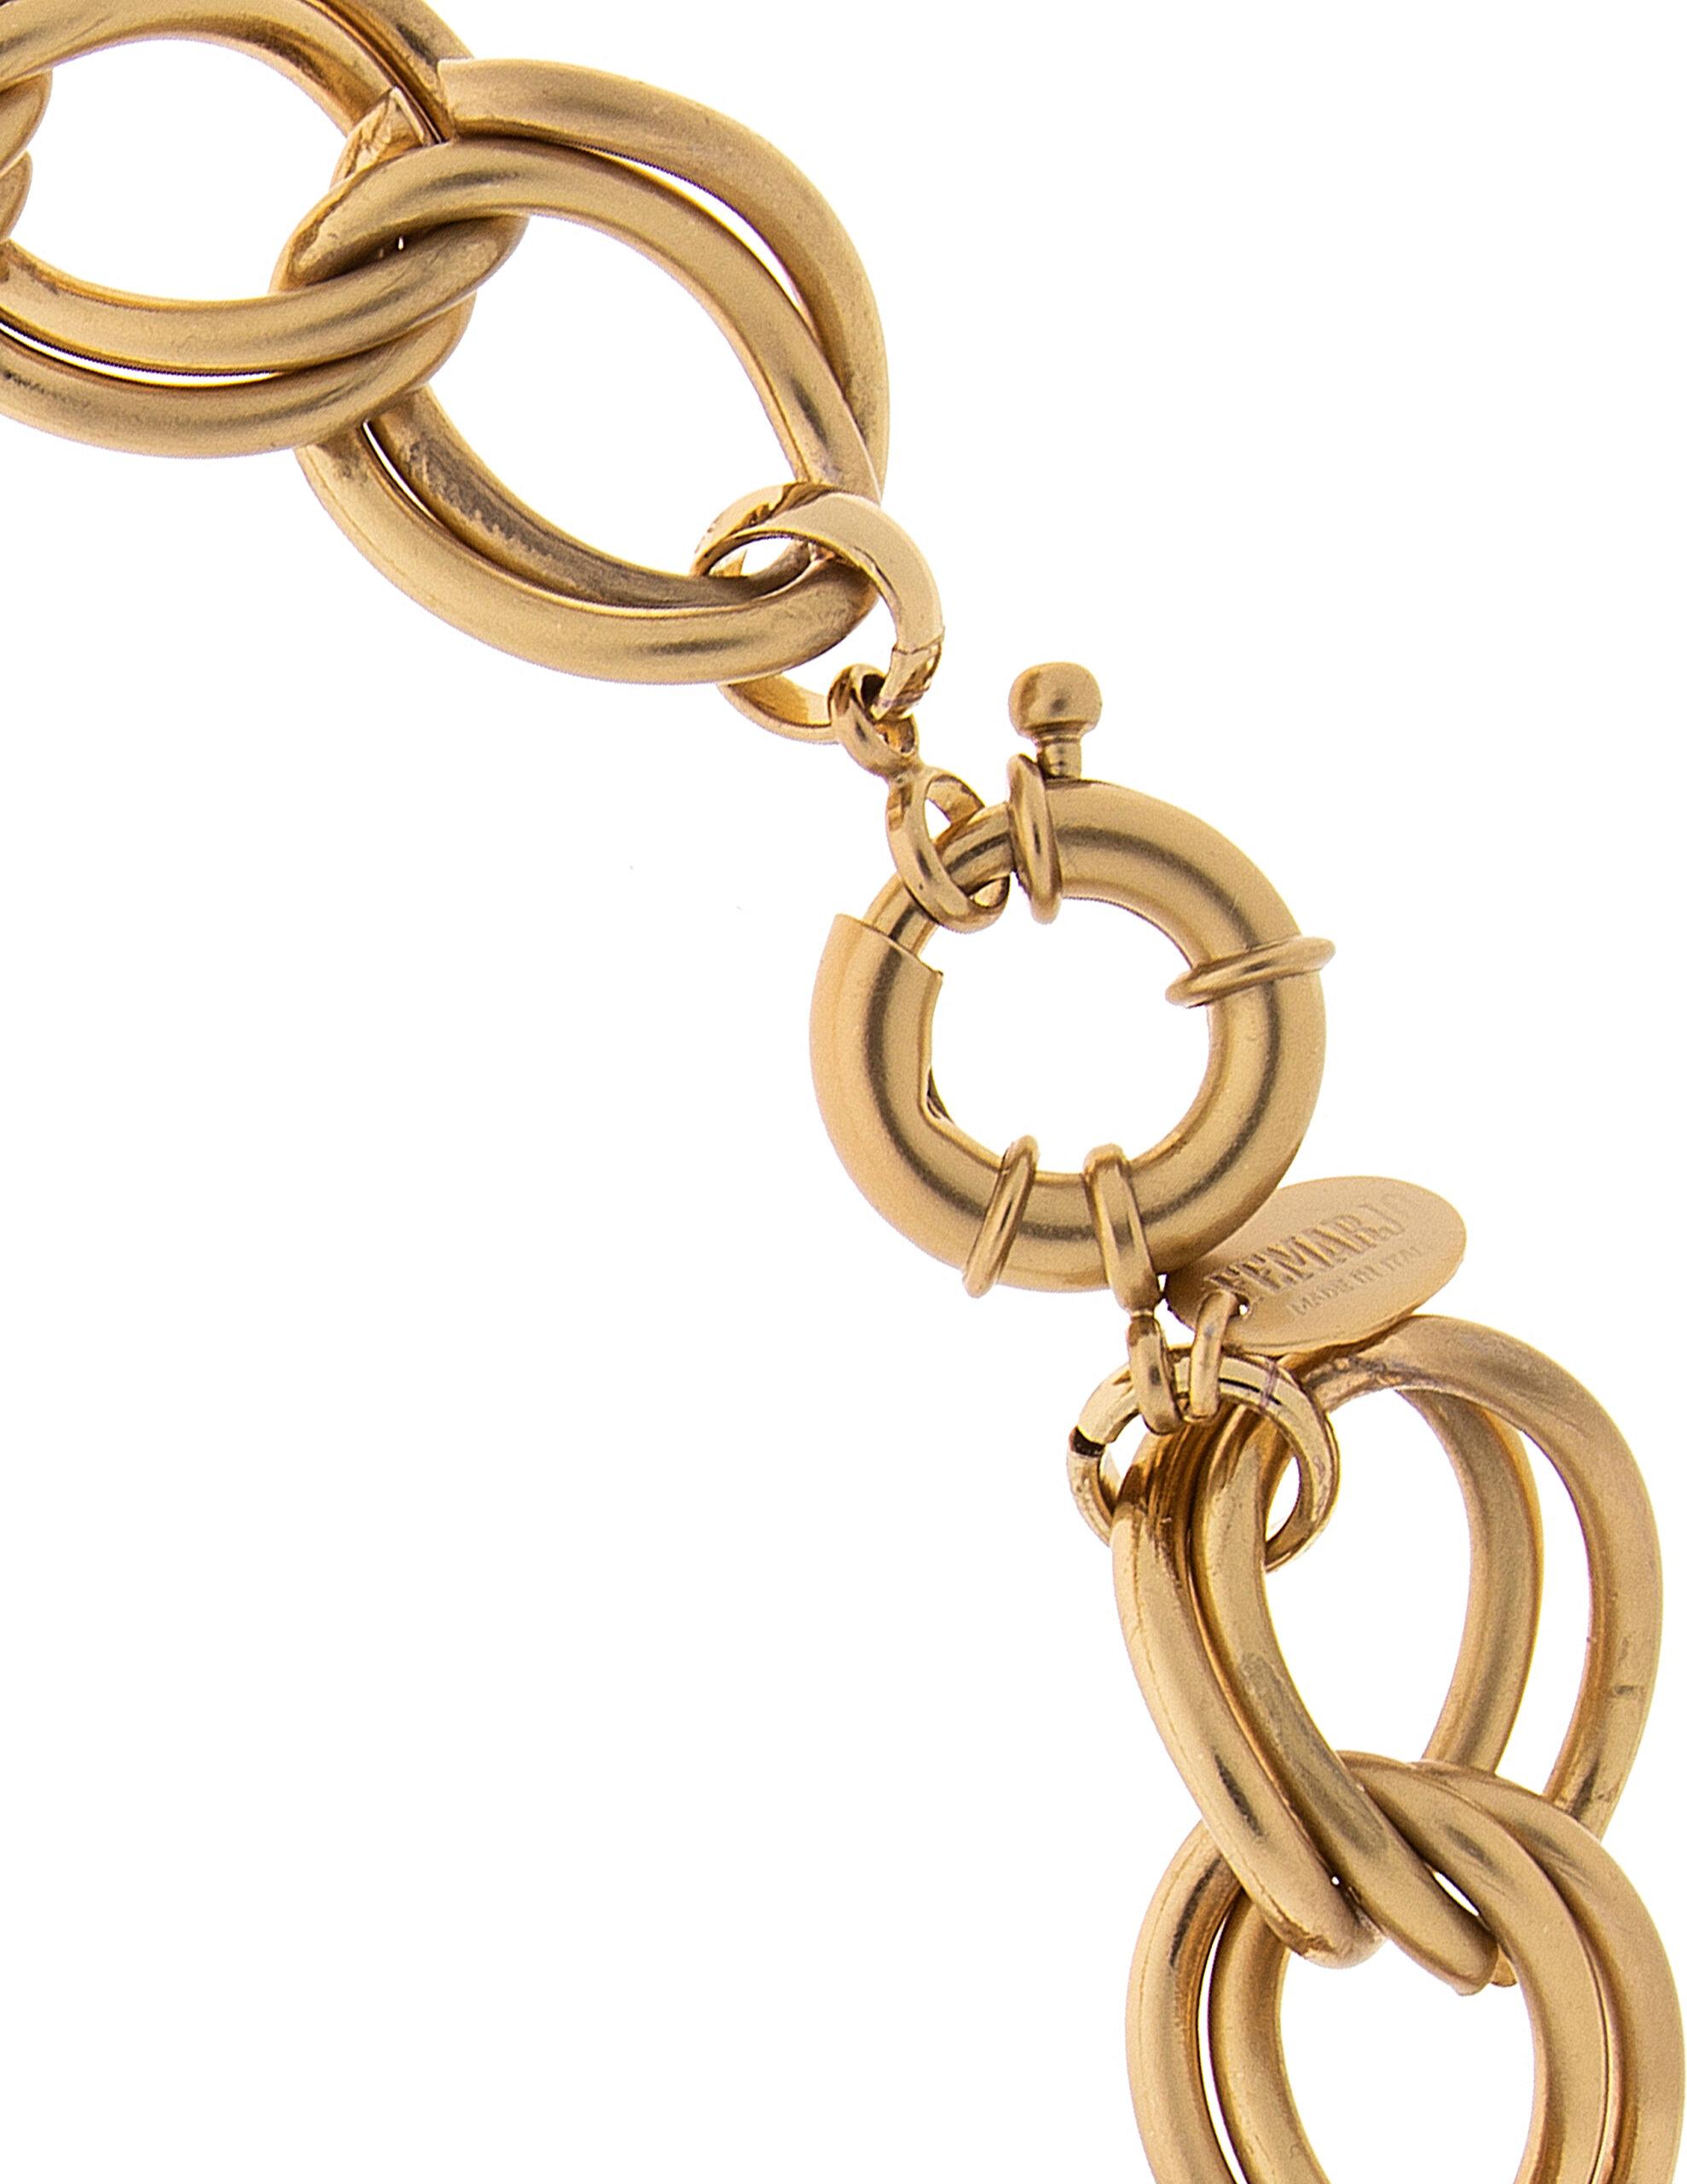 Brass chain necklace with 24kt gold satin finish
Adjustable lobster clasp closure
Adjustable length 45/48cm
Handmade in Italy
Nickel free, Hypoallergenic